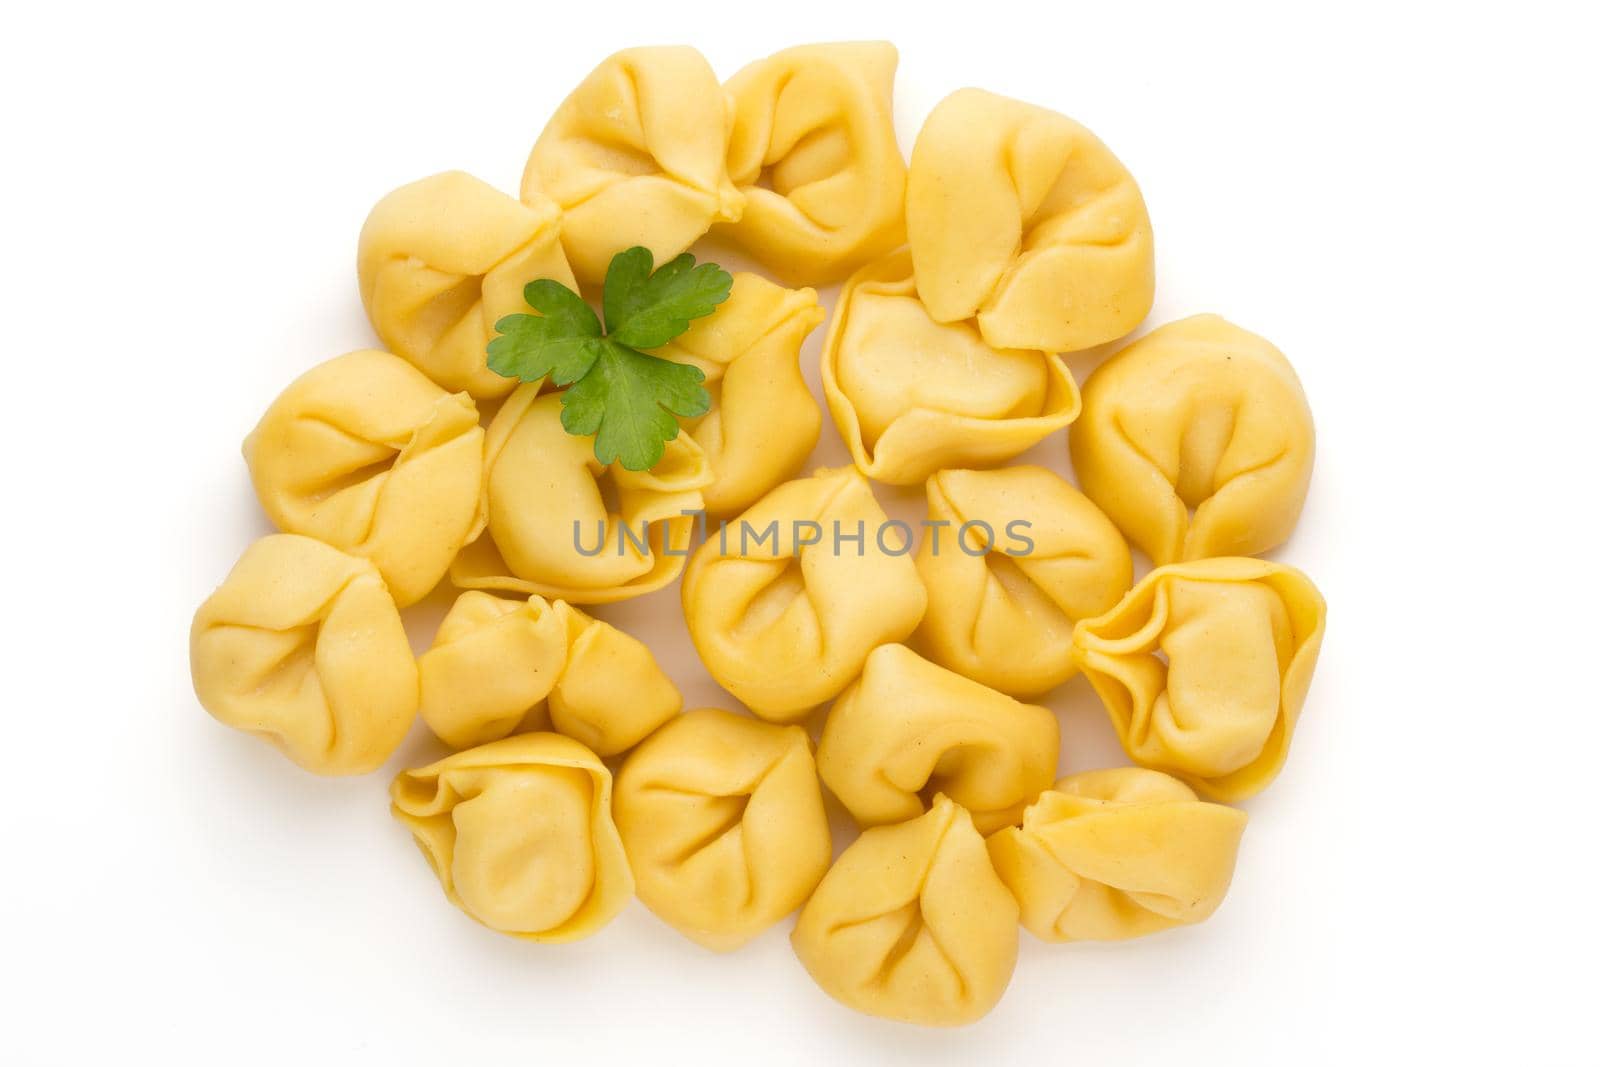 Raw homemade pasta,tortellini with herbs. by gitusik